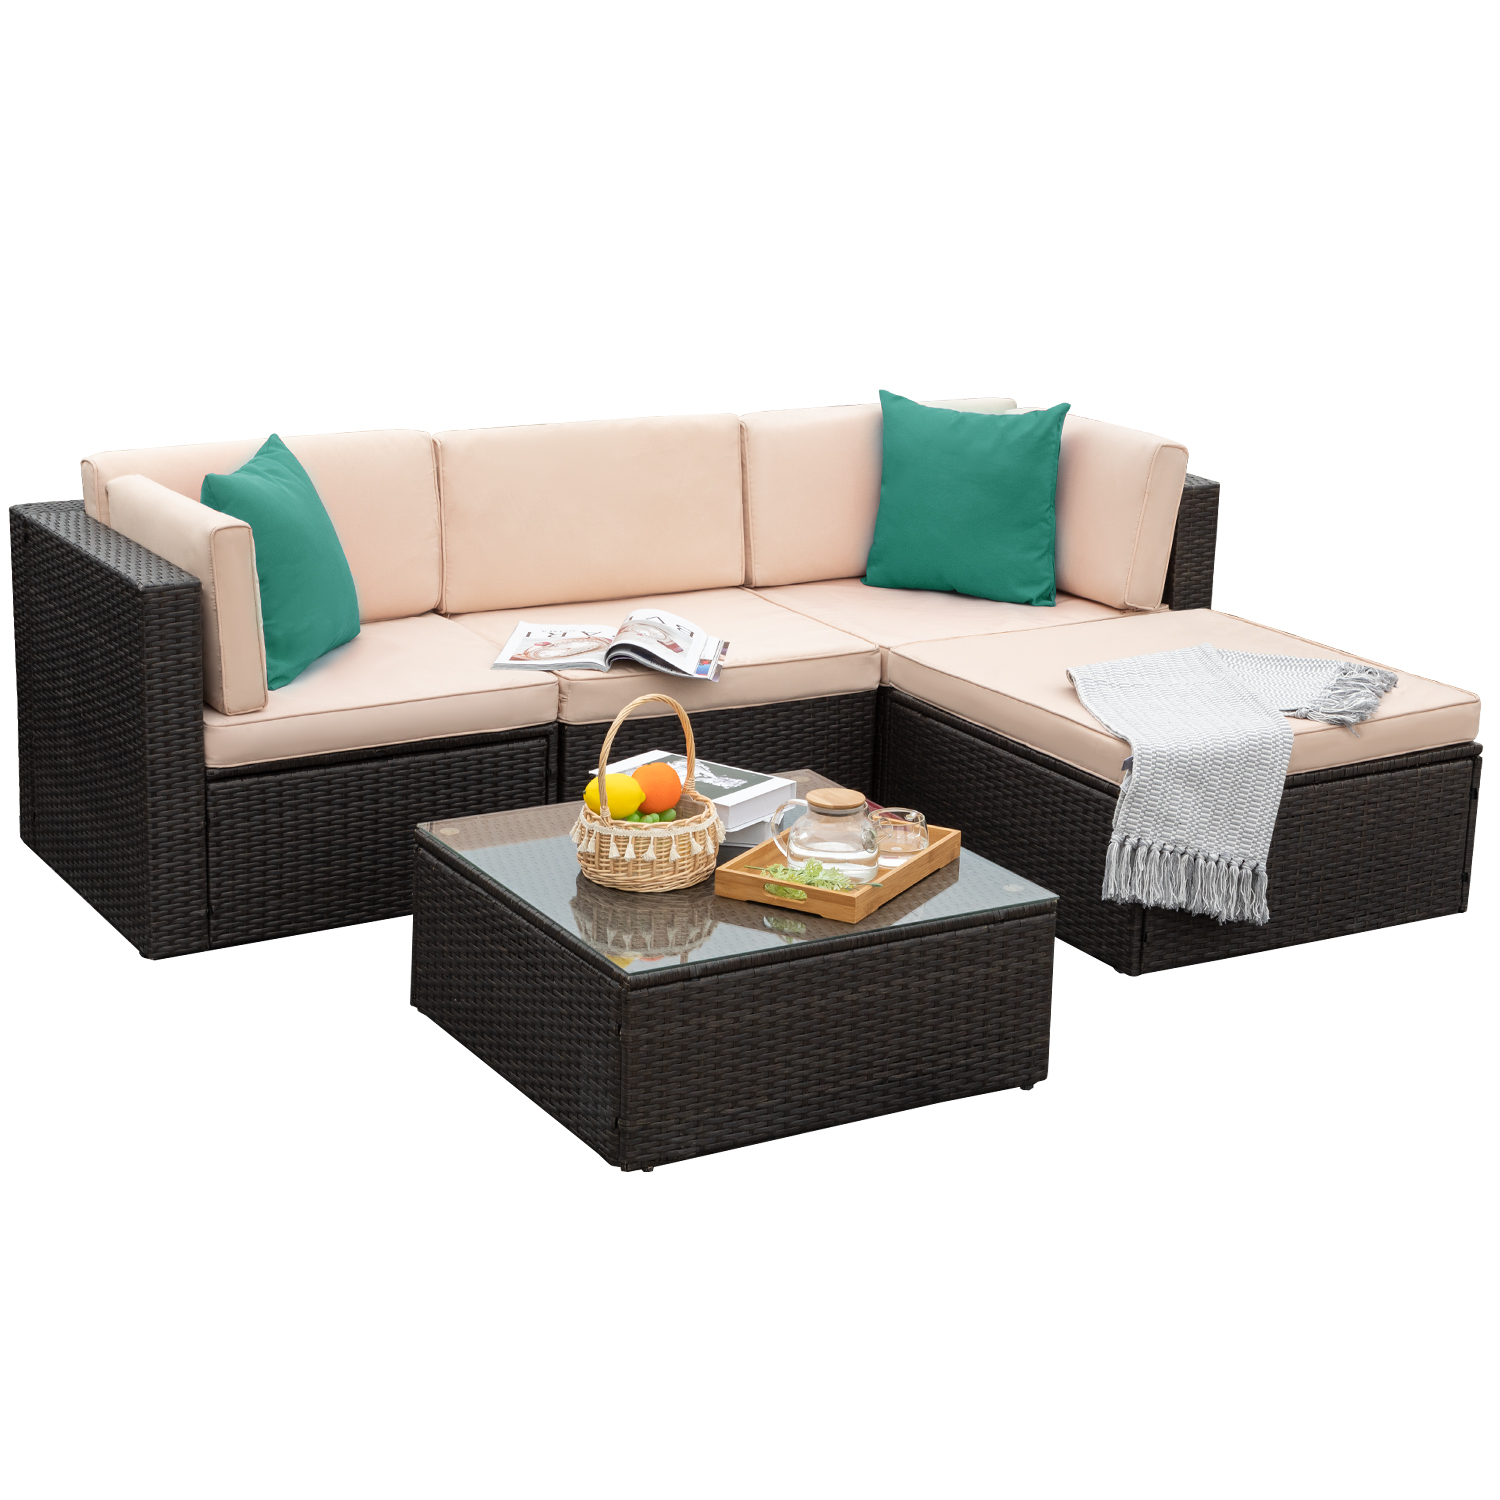 Lacoo 5 Pieces All-Weather Conversation Set and Glass Table Dark Green Pillow - image 1 of 7